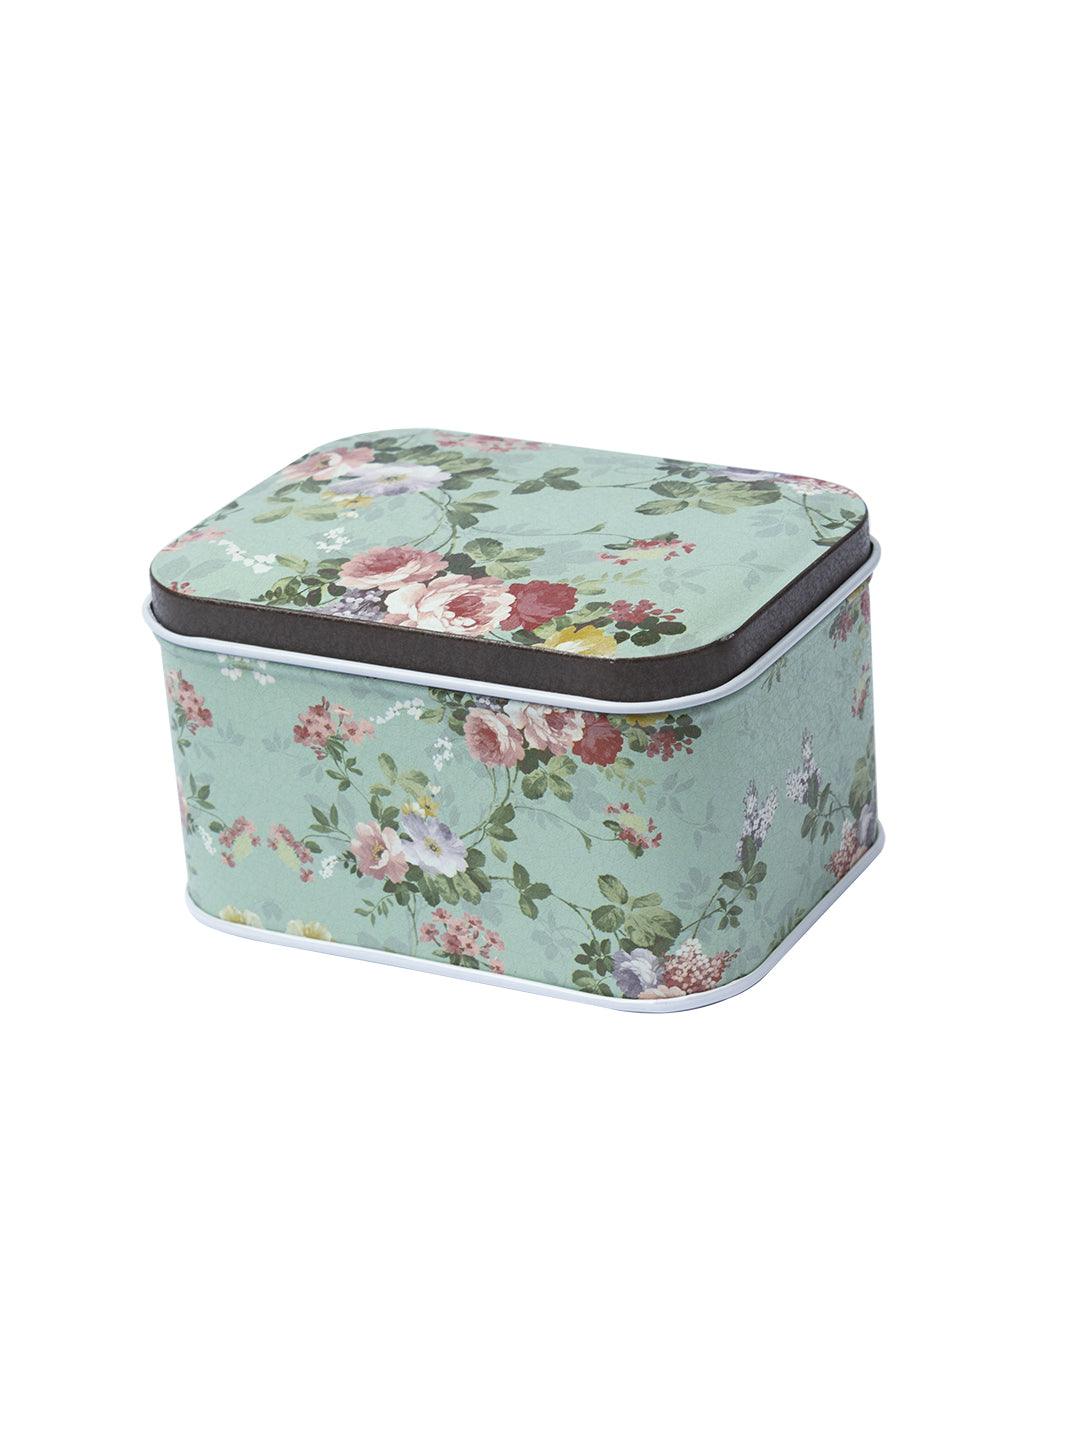 Floral Metal Tin Container Box - Light Green - MARKET 99